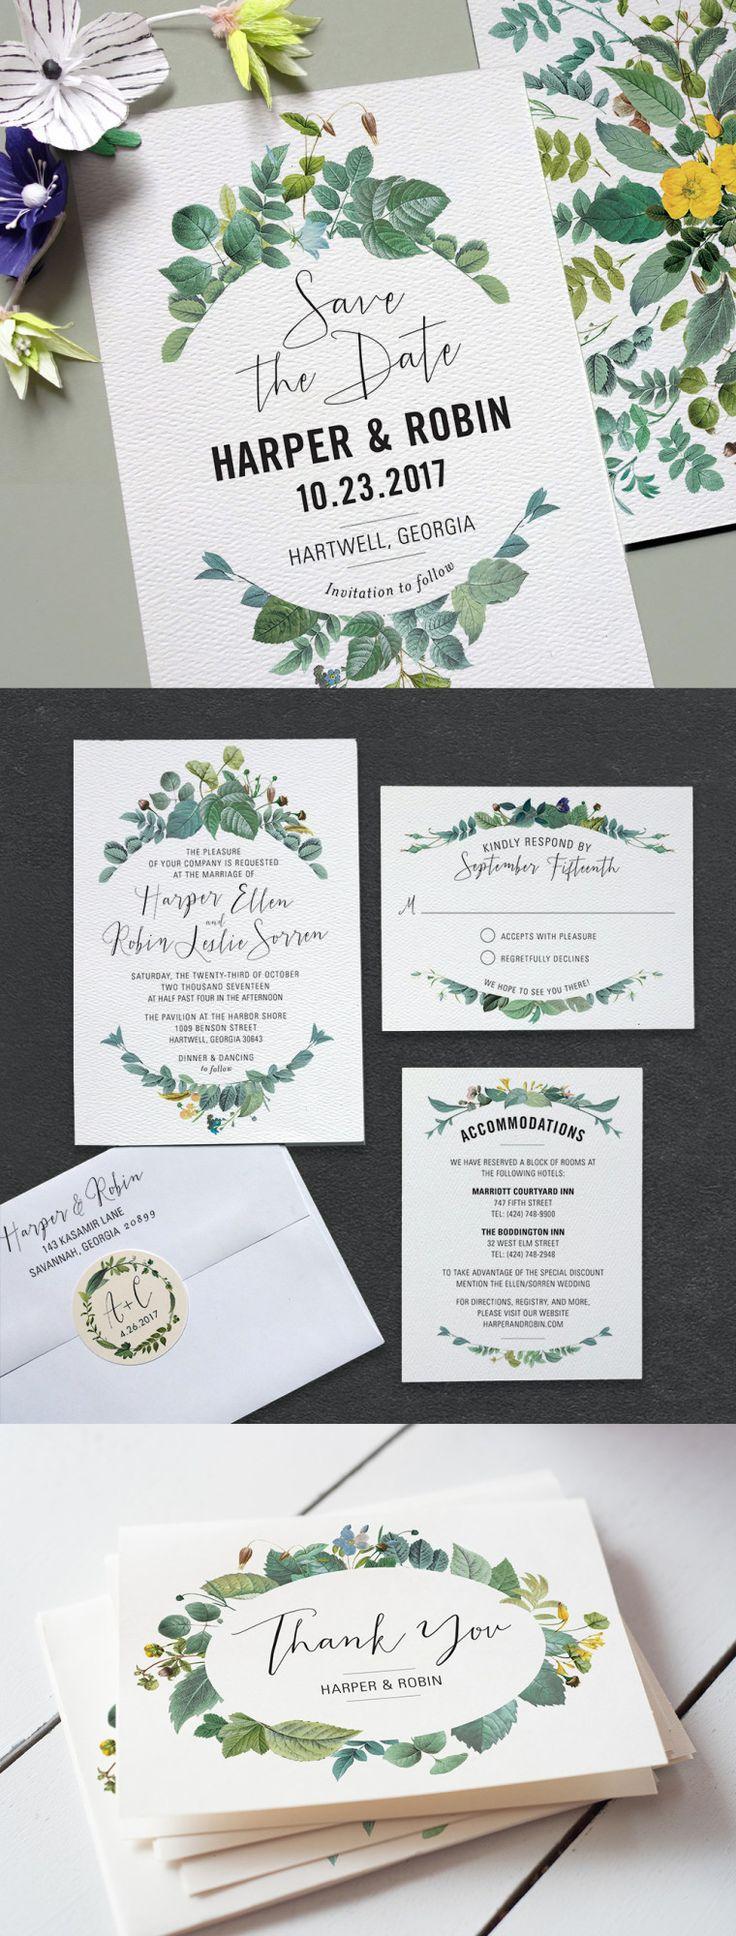 Hochzeit - This New Line From Printable Press Is Fresh As Hell